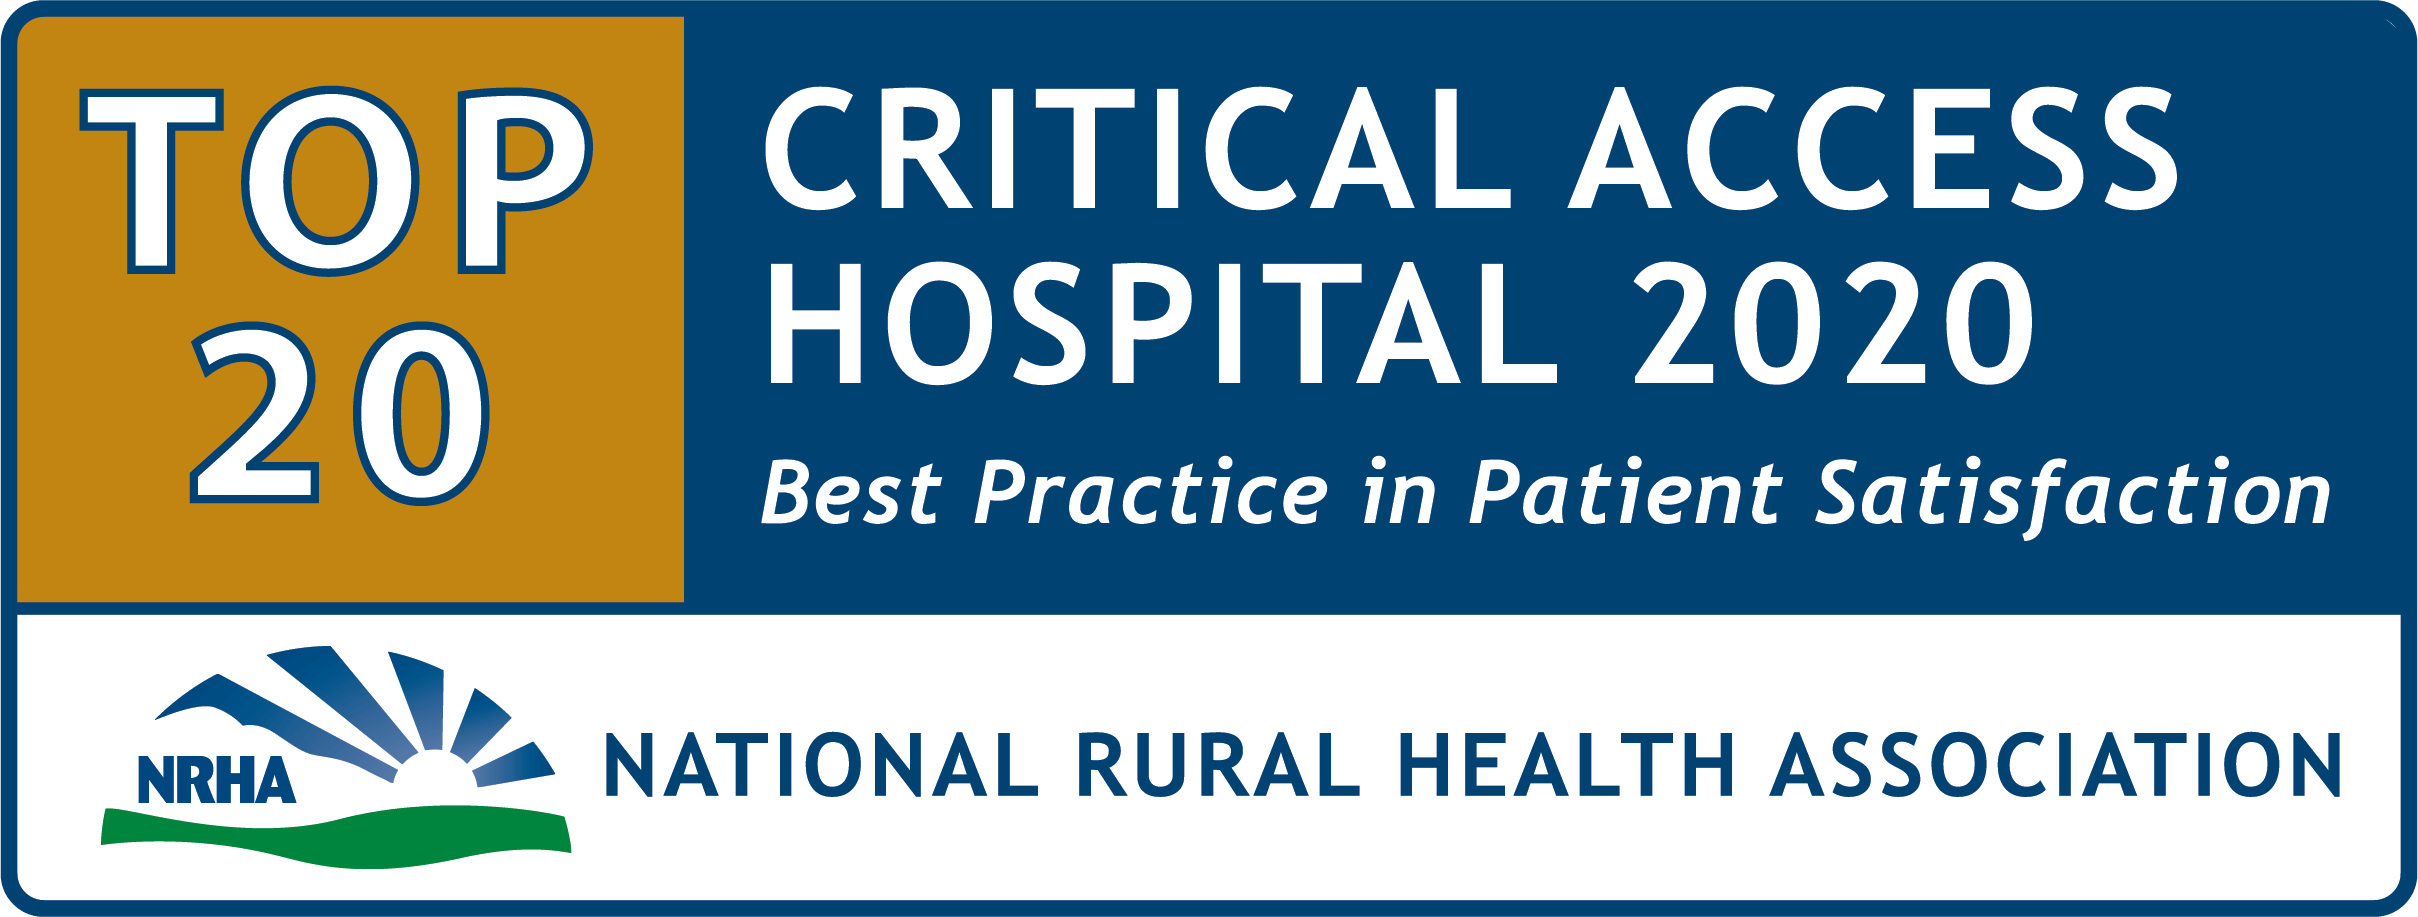 Top 20 Critical Access Hospitals for Patient Satisfaction